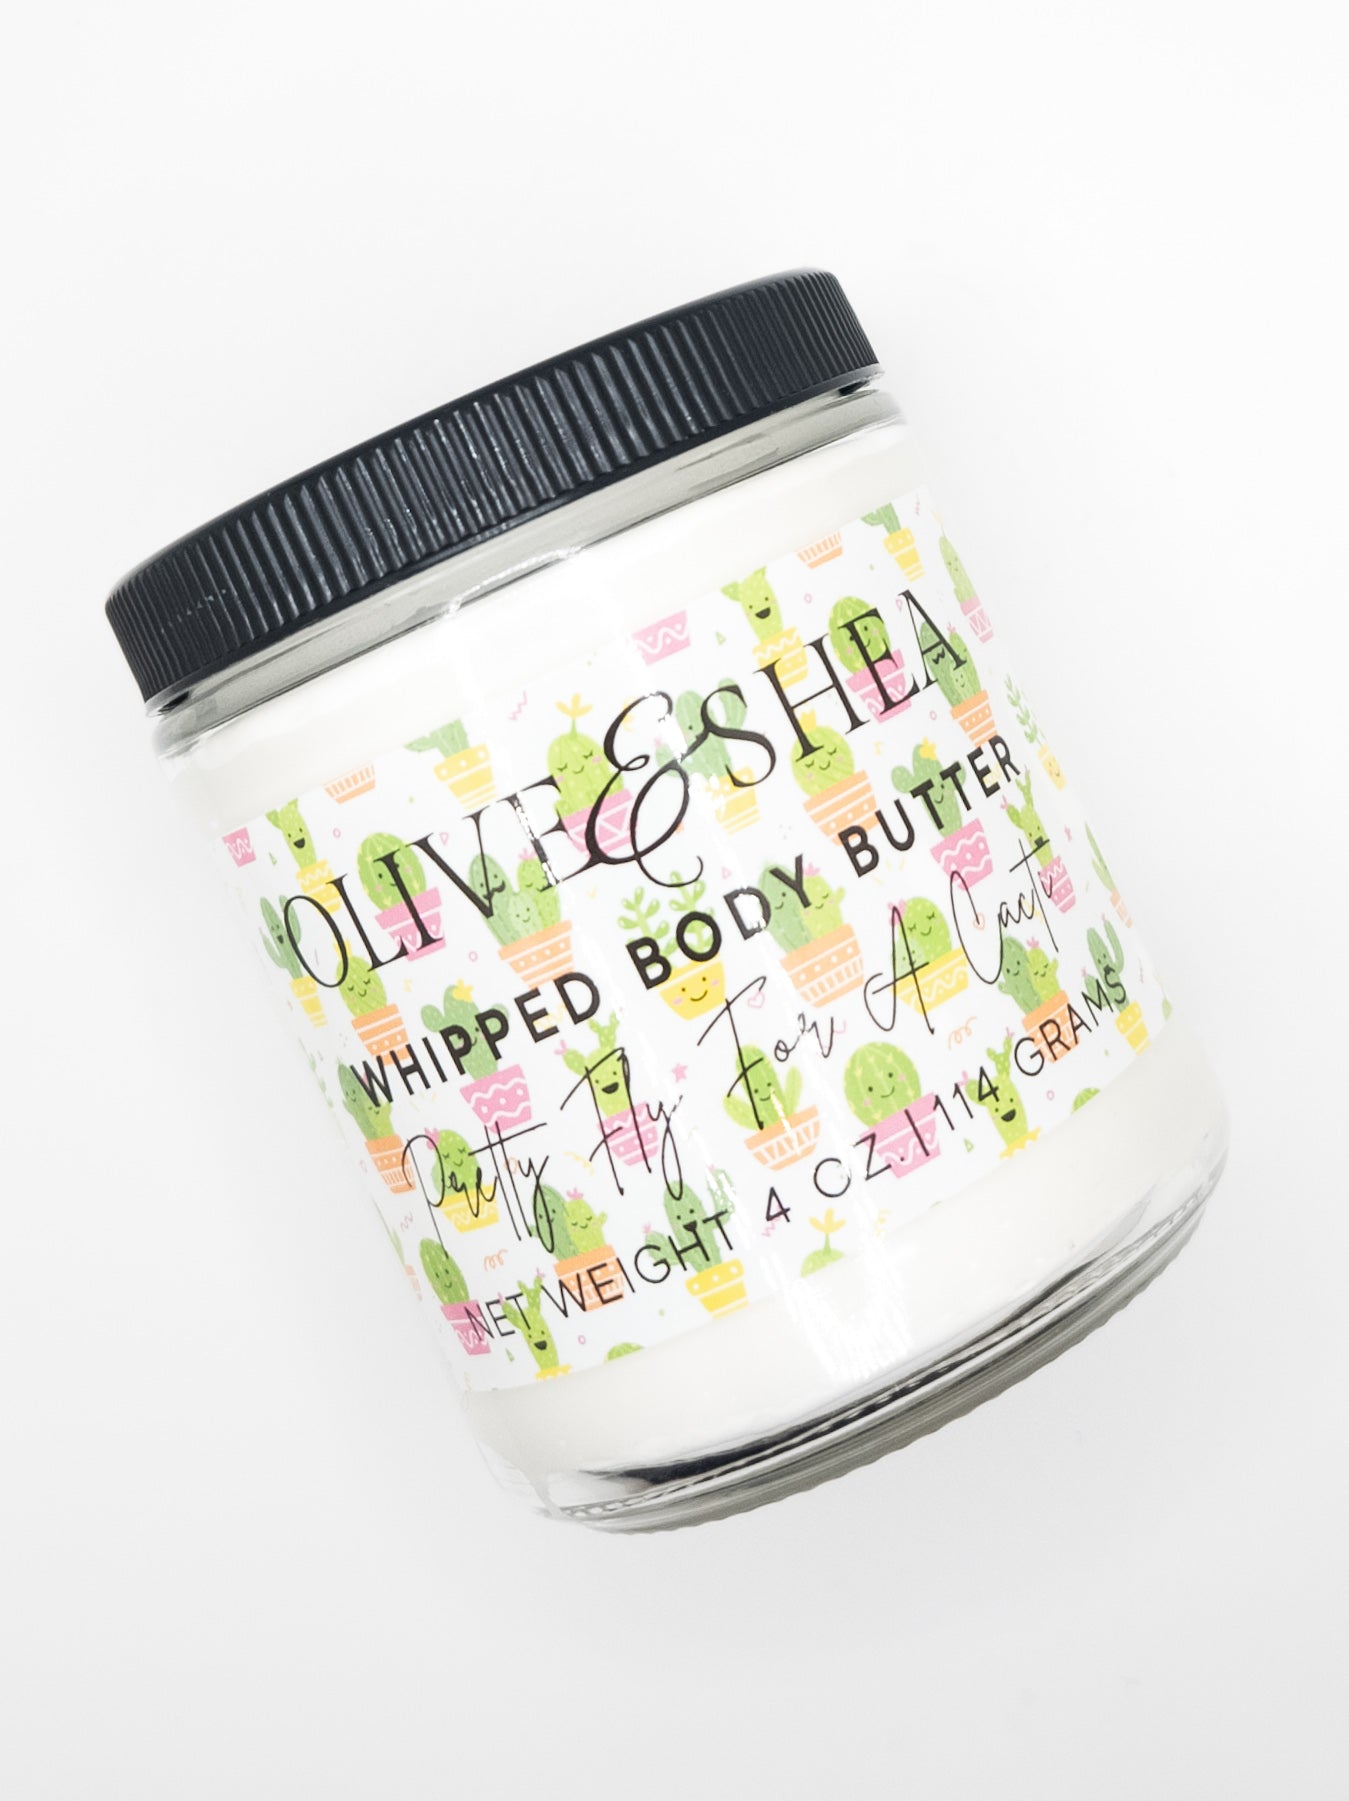 Pretty Fly For A Cacti Whipped Body Butter